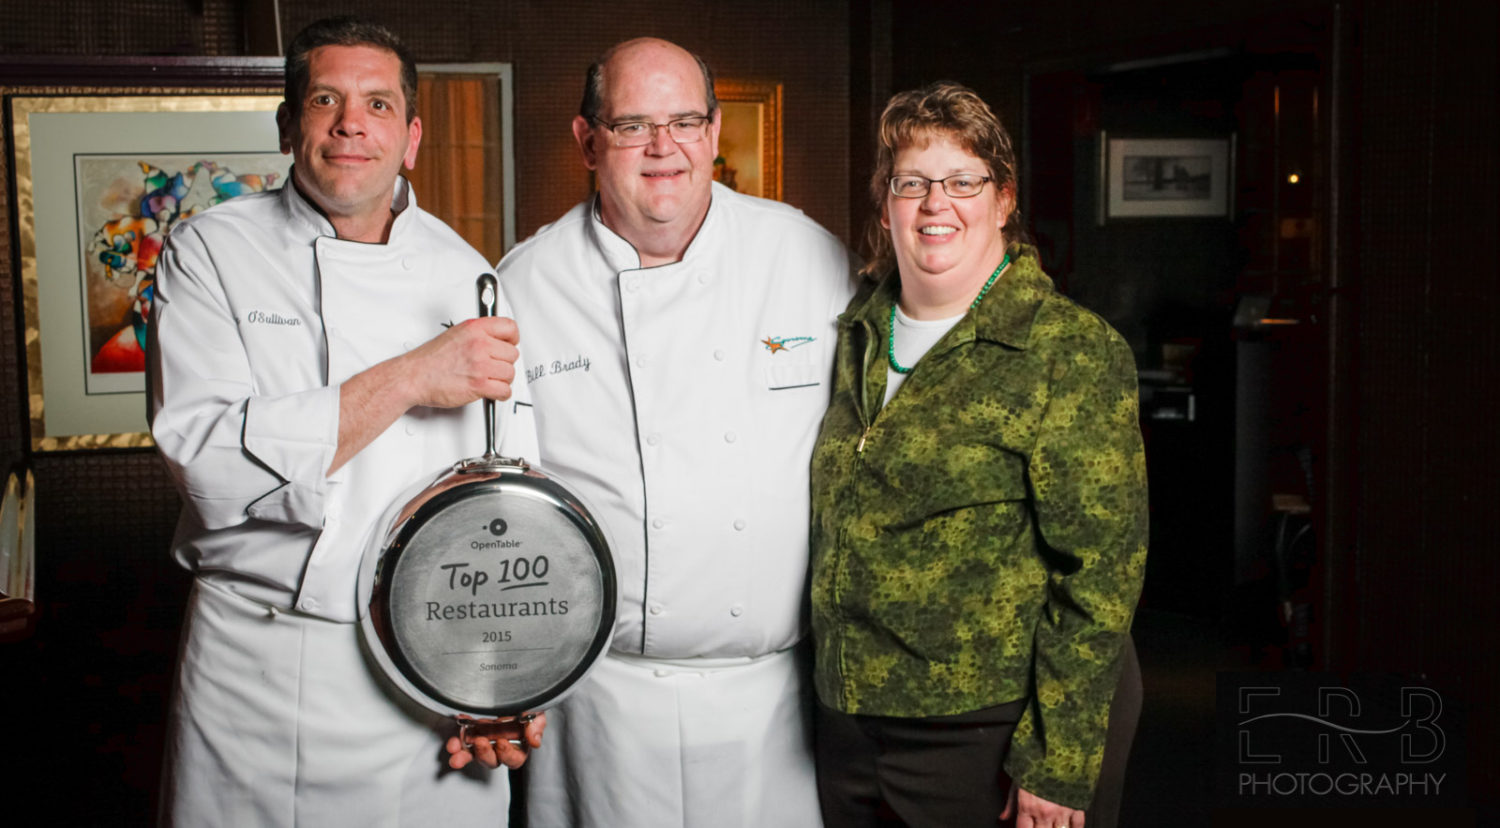 Chef O'Sullivan with Chef Bill Brady and his wife Kim (Taken by Erb Photography for Mass Foodies).